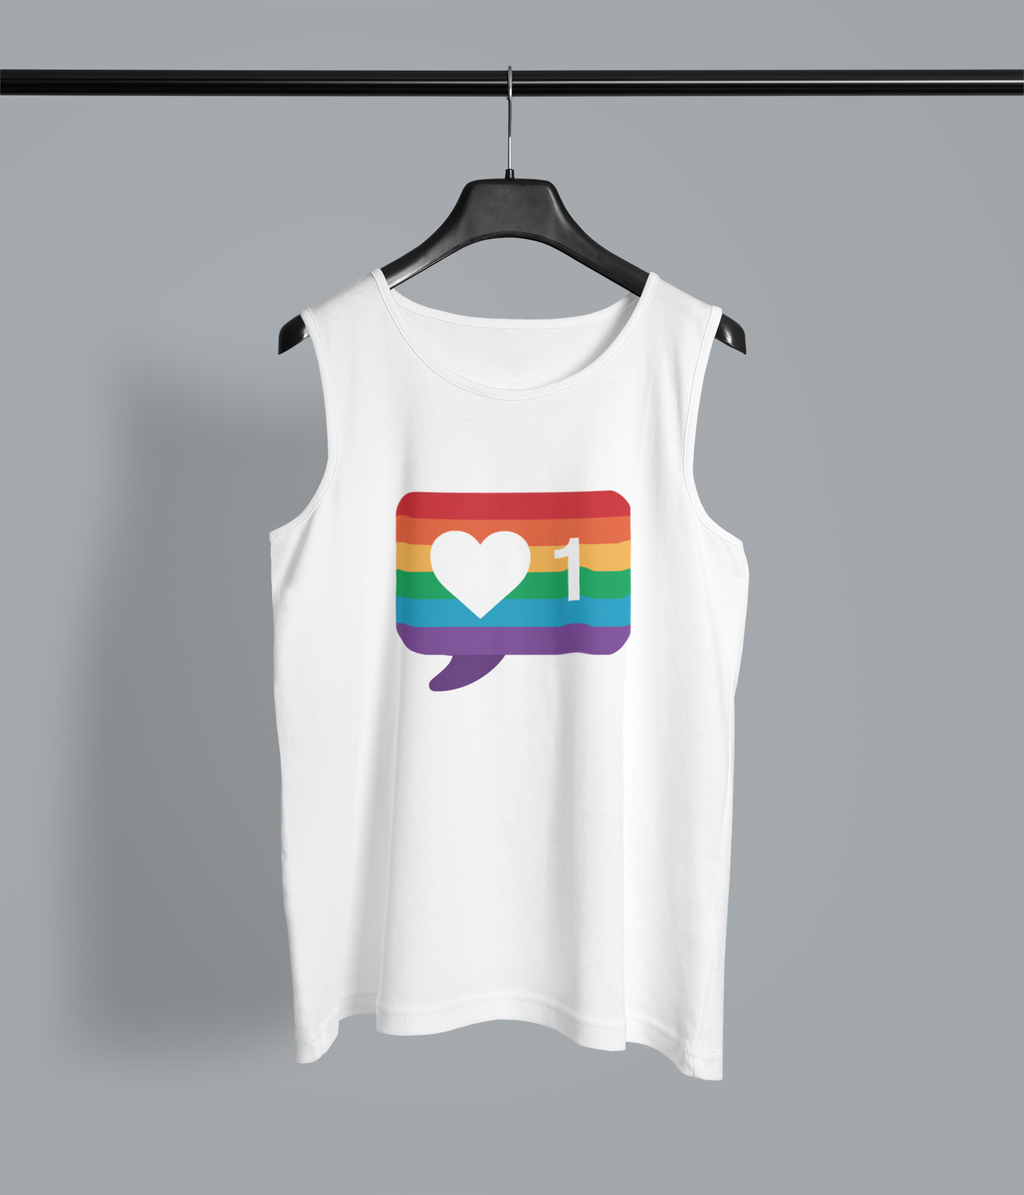 mockup-featuring-a-men-s-tank-top-hanging-from-a-dark-metal-pipe-1986-el1.png